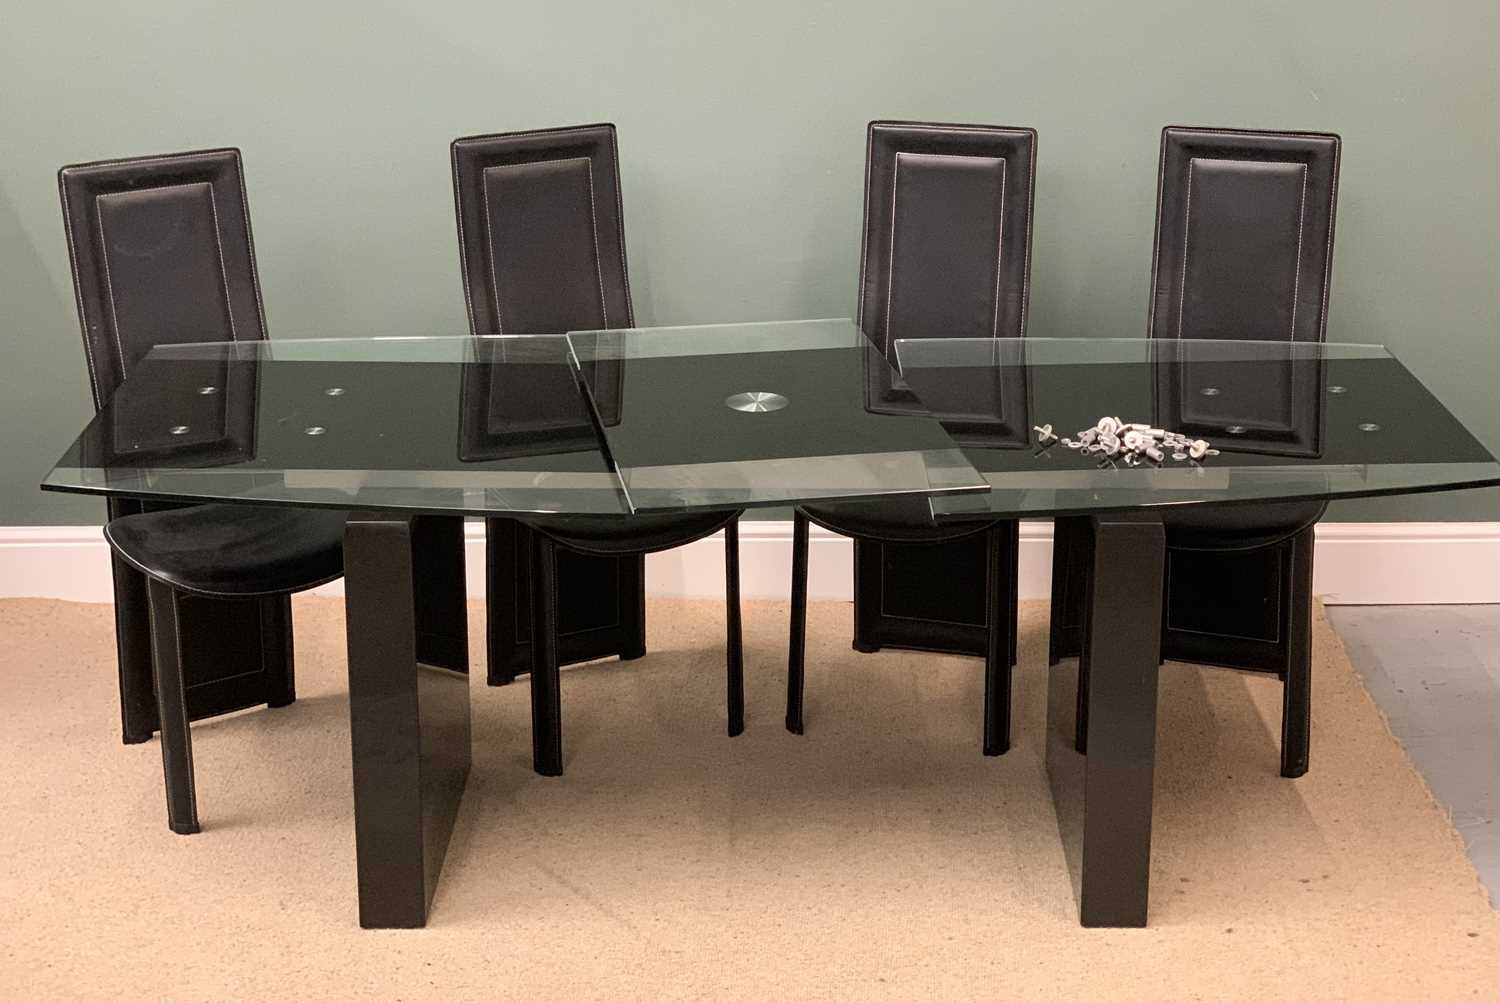 ULTRA MODERN GLASS EXTENDING DINING TABLE, 76cms H, 166cms W (closed), 216cms (open), 90cms D and